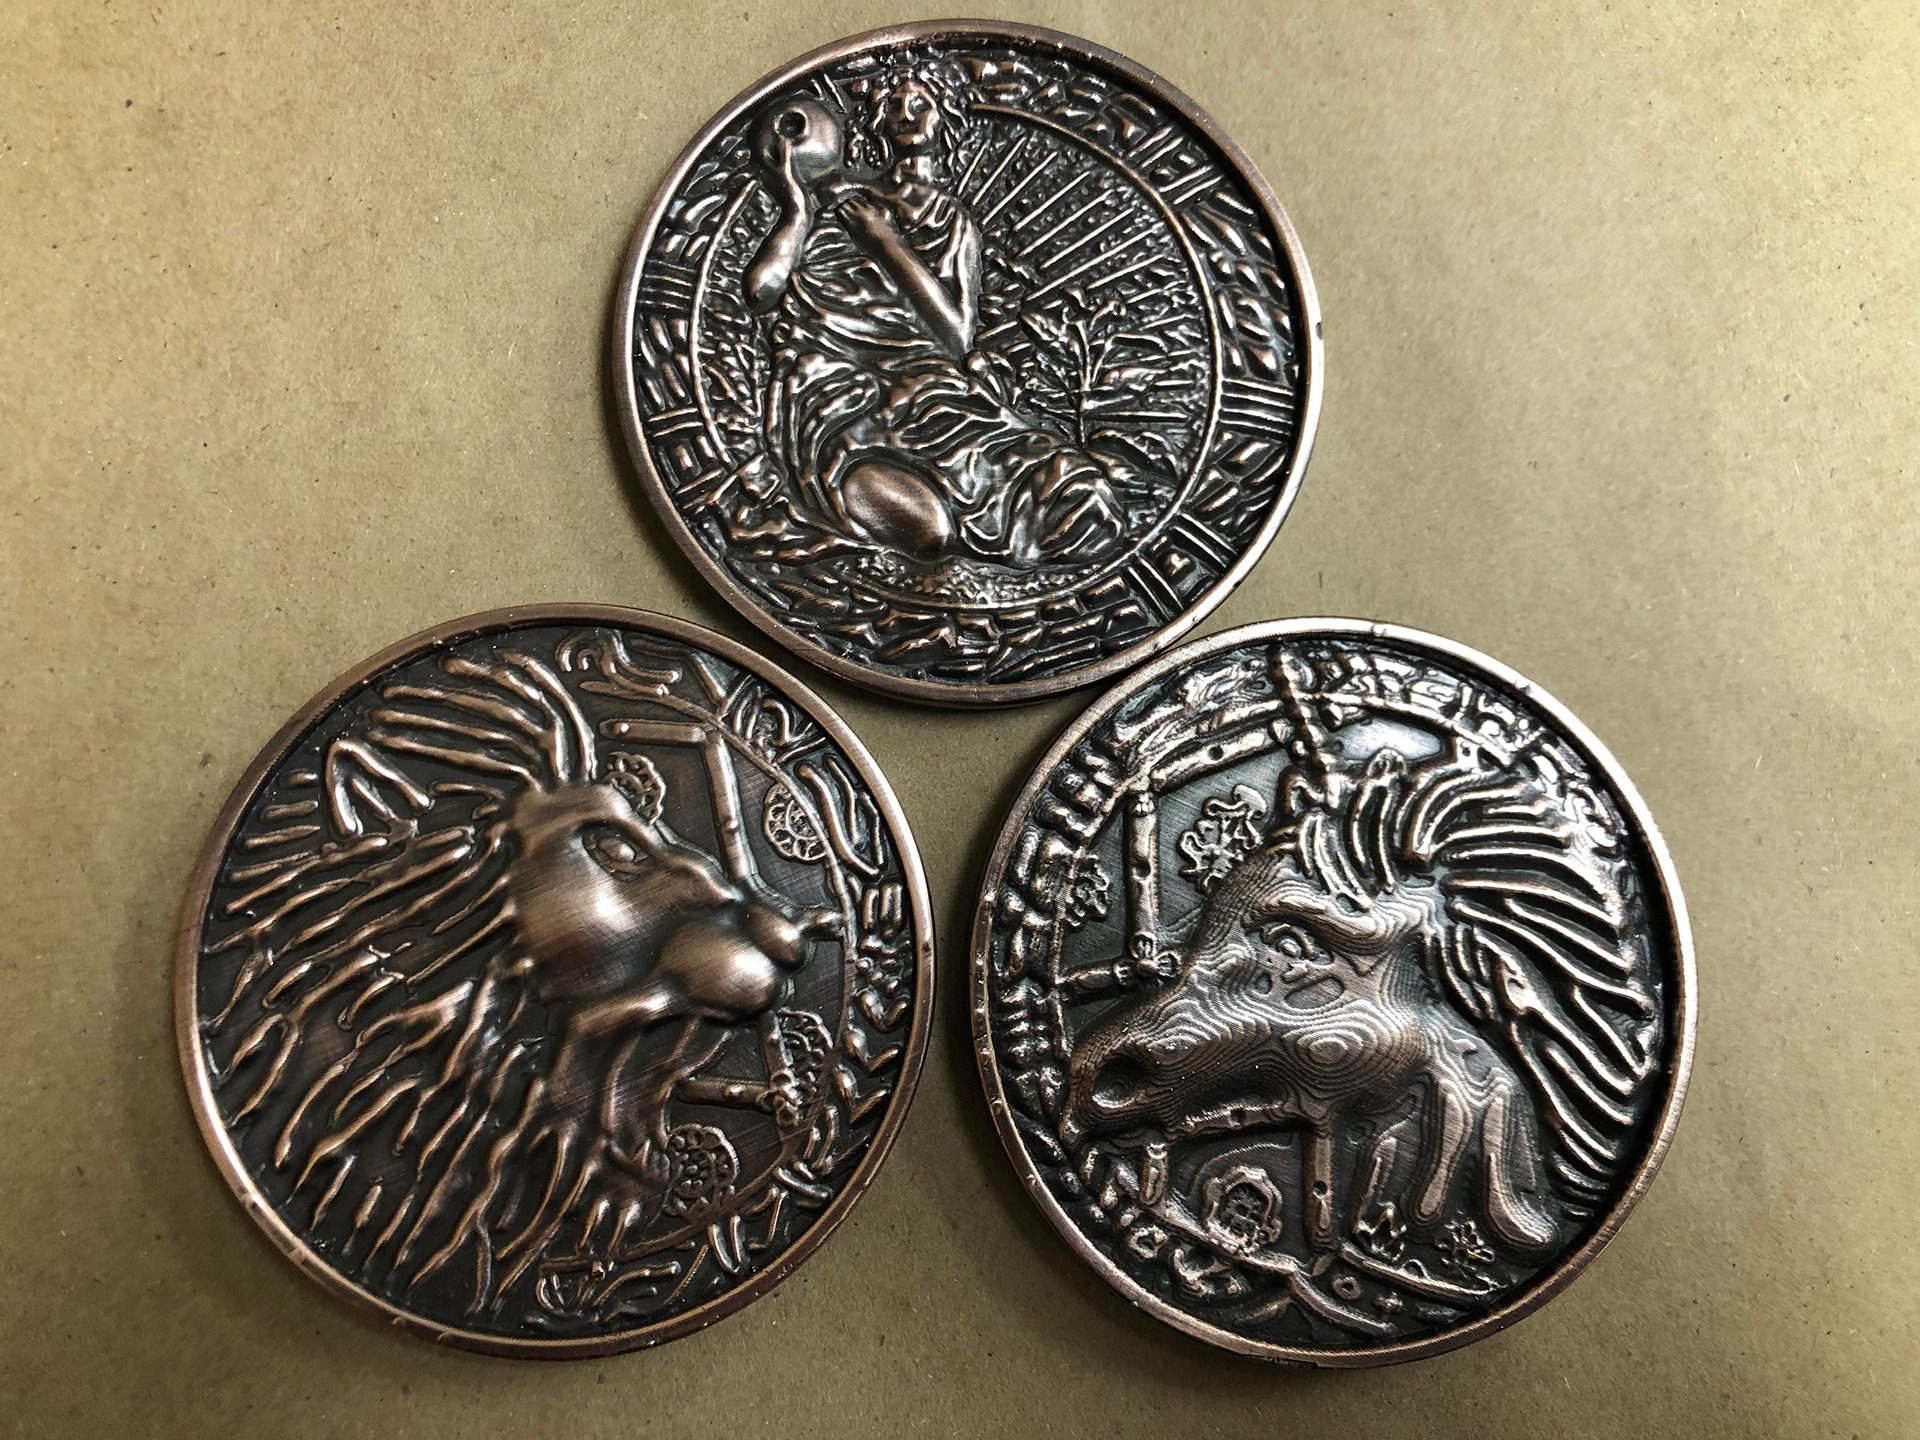 Resident Evil 2 medallions recreated with 3D printing and electroplating